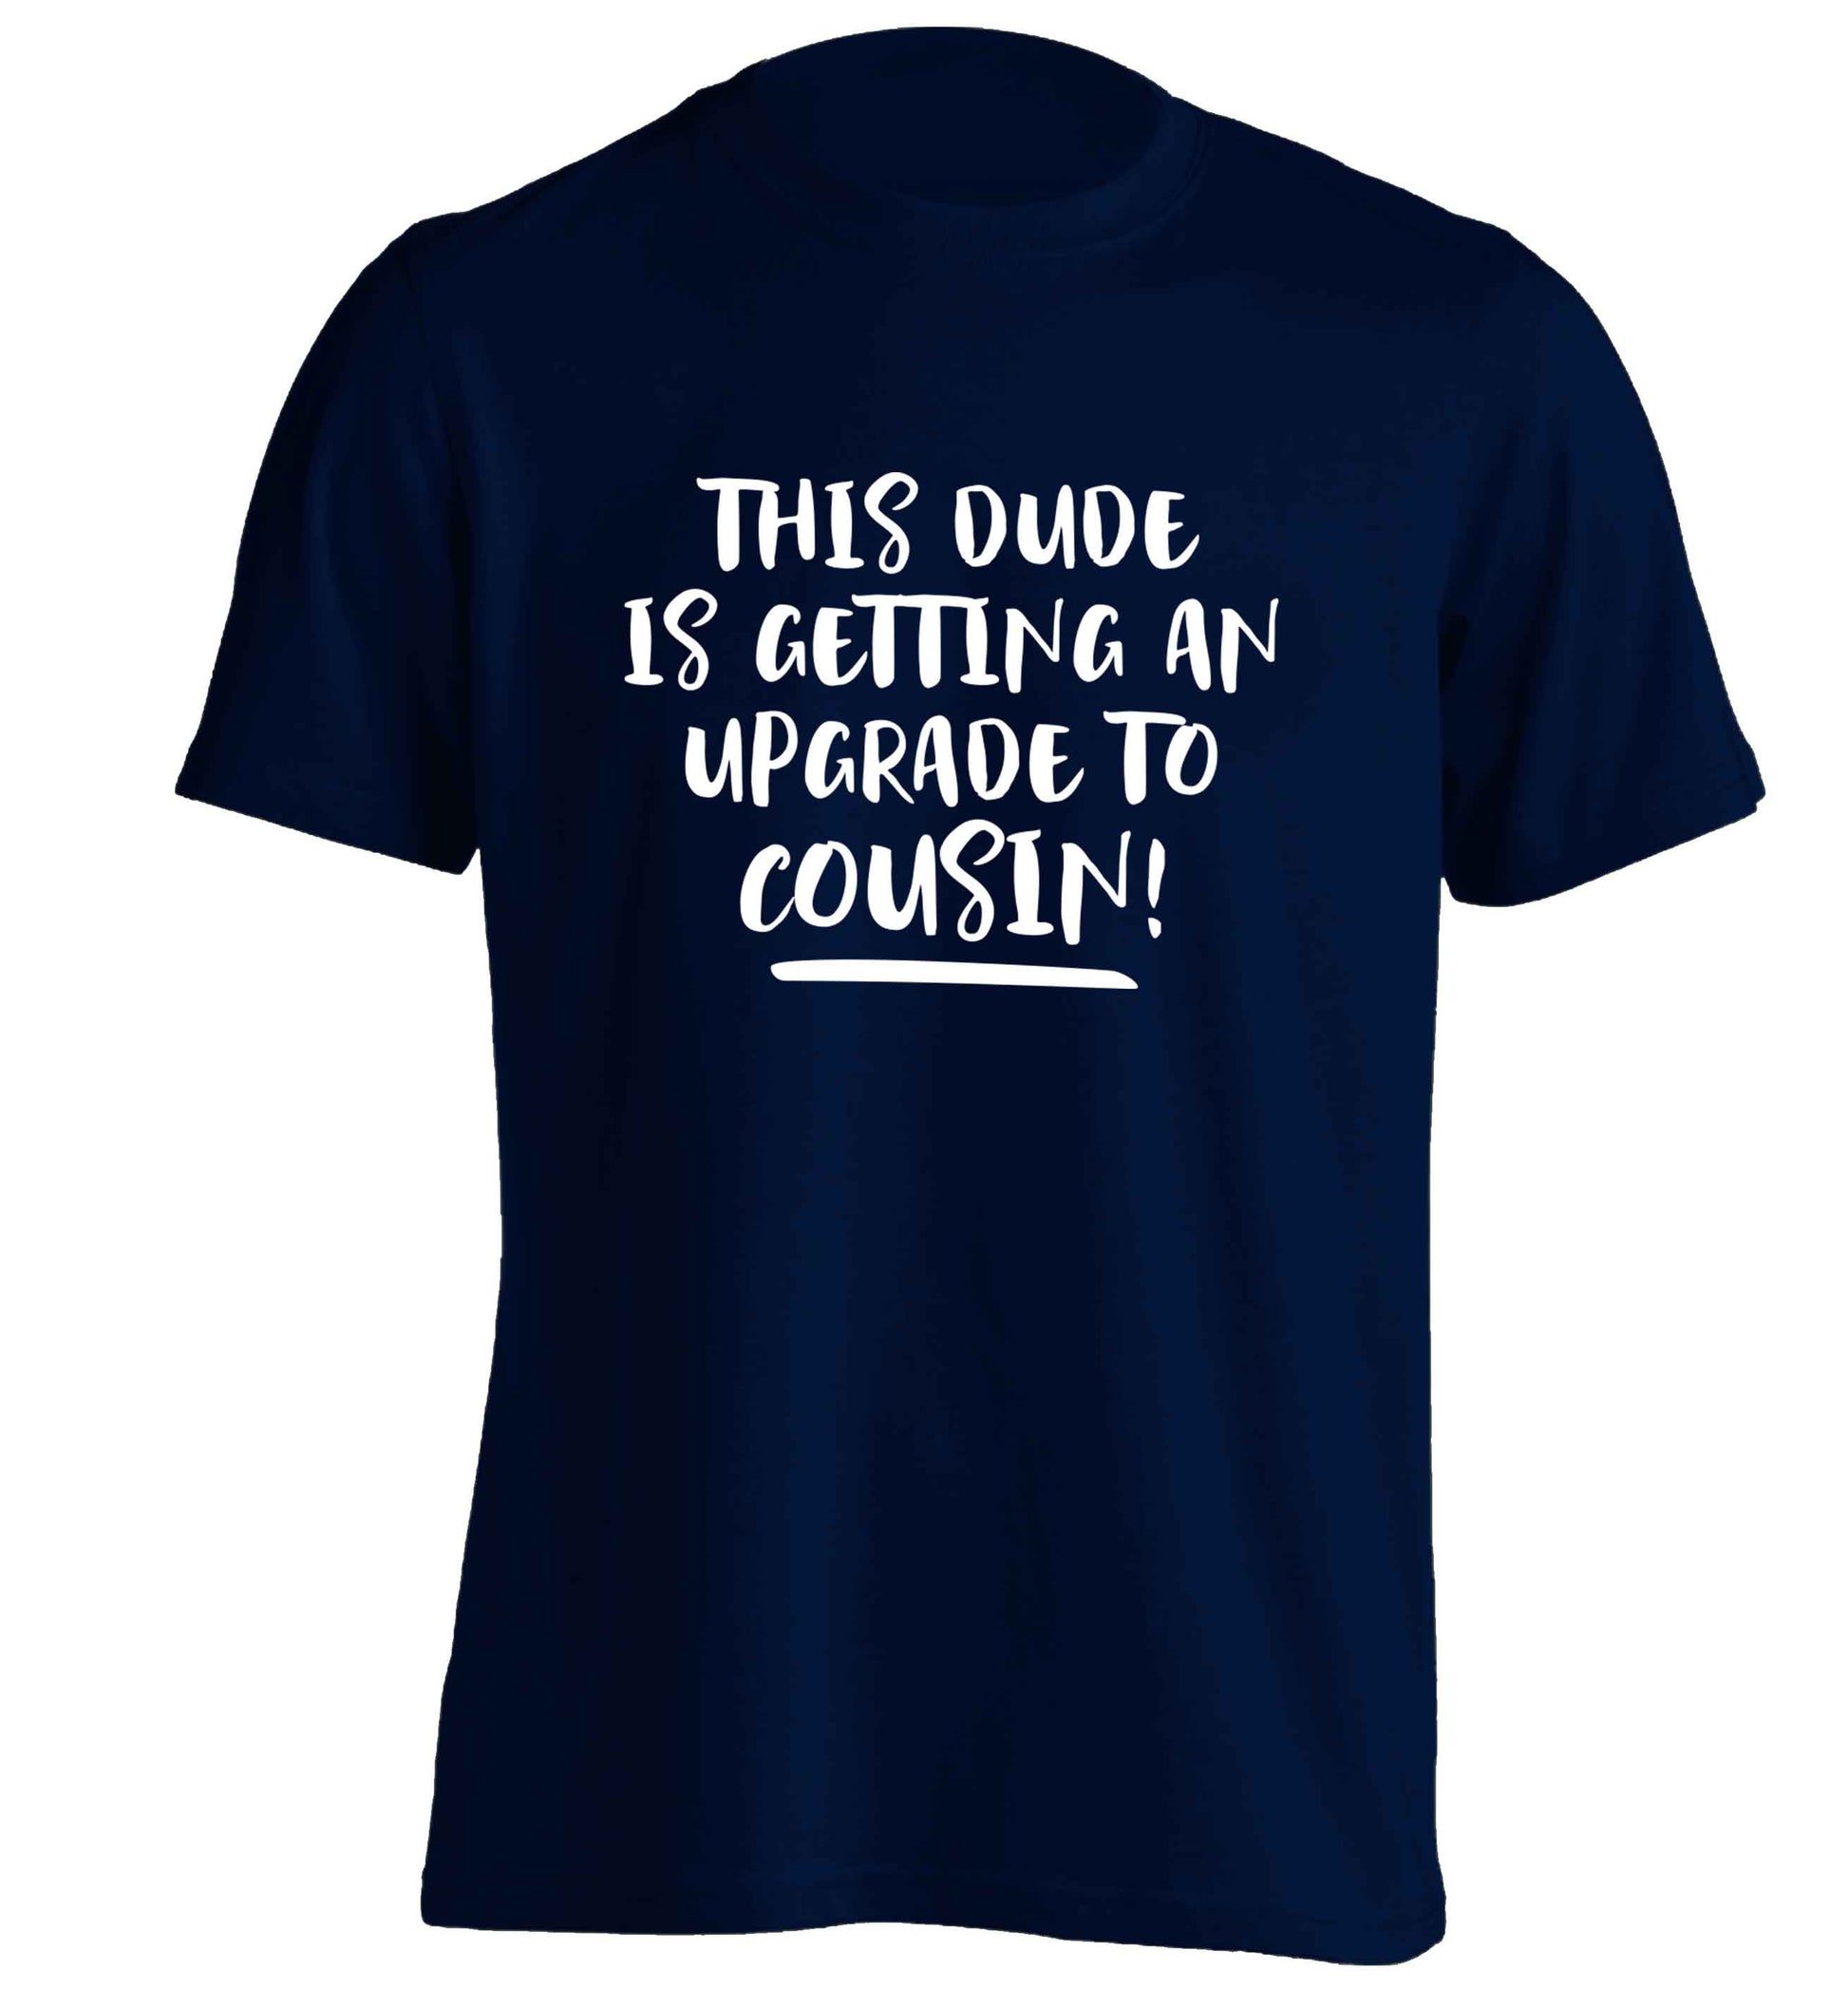 This dude is getting an upgrade to cousin! adults unisex navy Tshirt 2XL